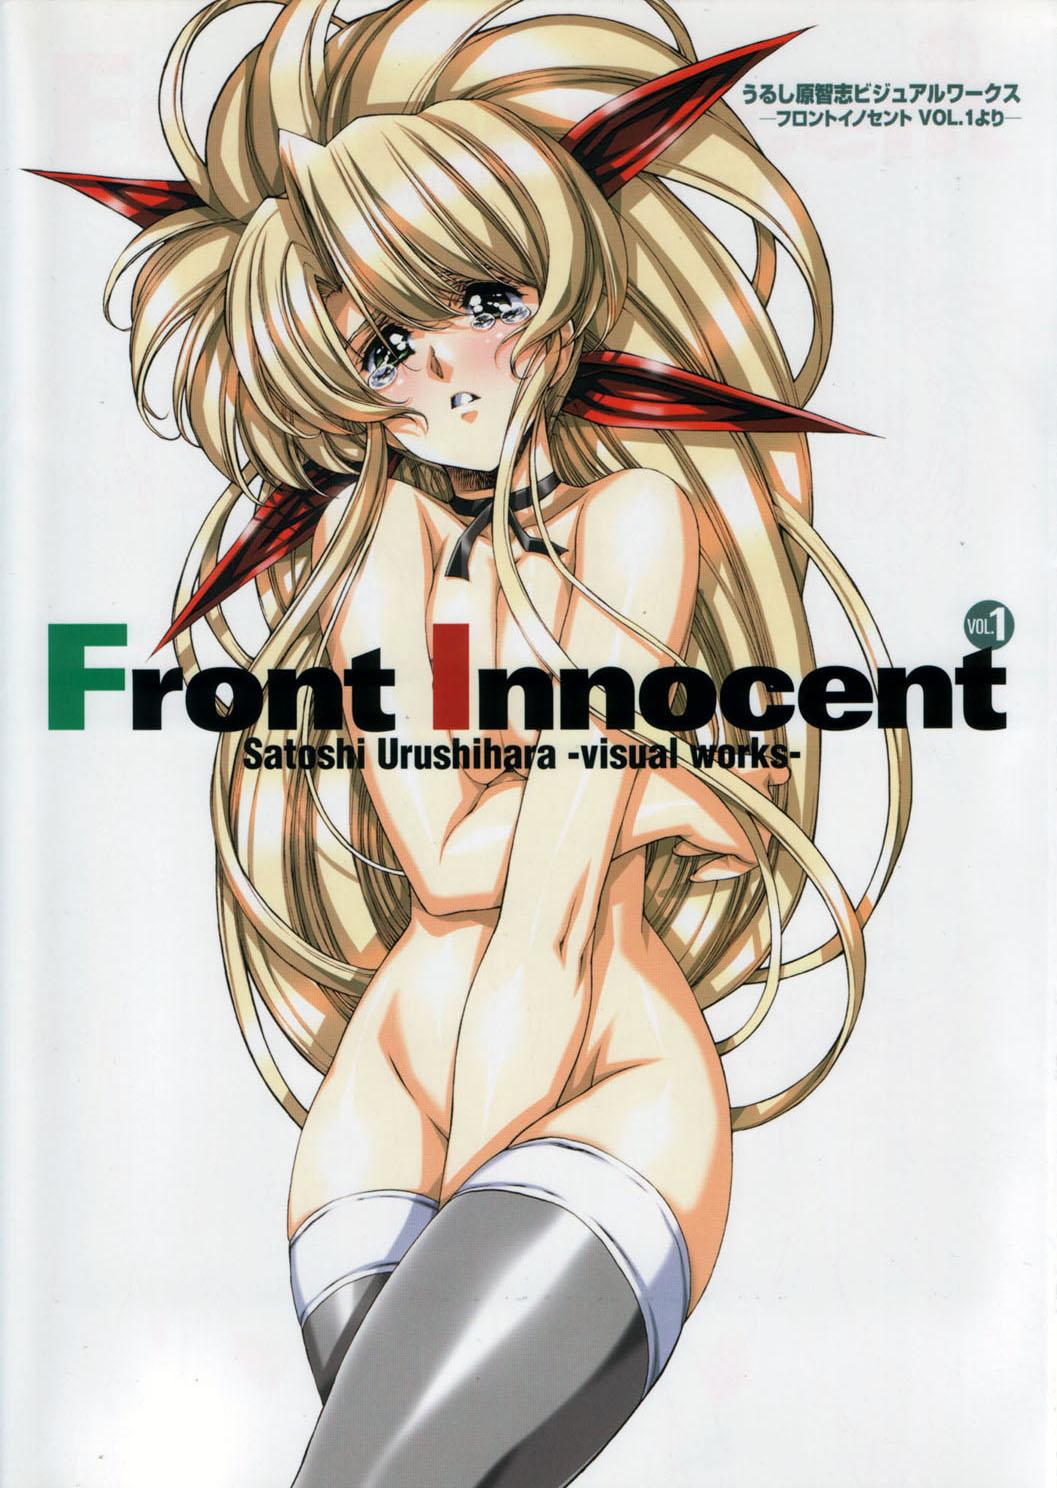 Squirters Front Innocent #1: Satoshi Urushihara Visual Works - Another lady innocent Free Amature - Page 2